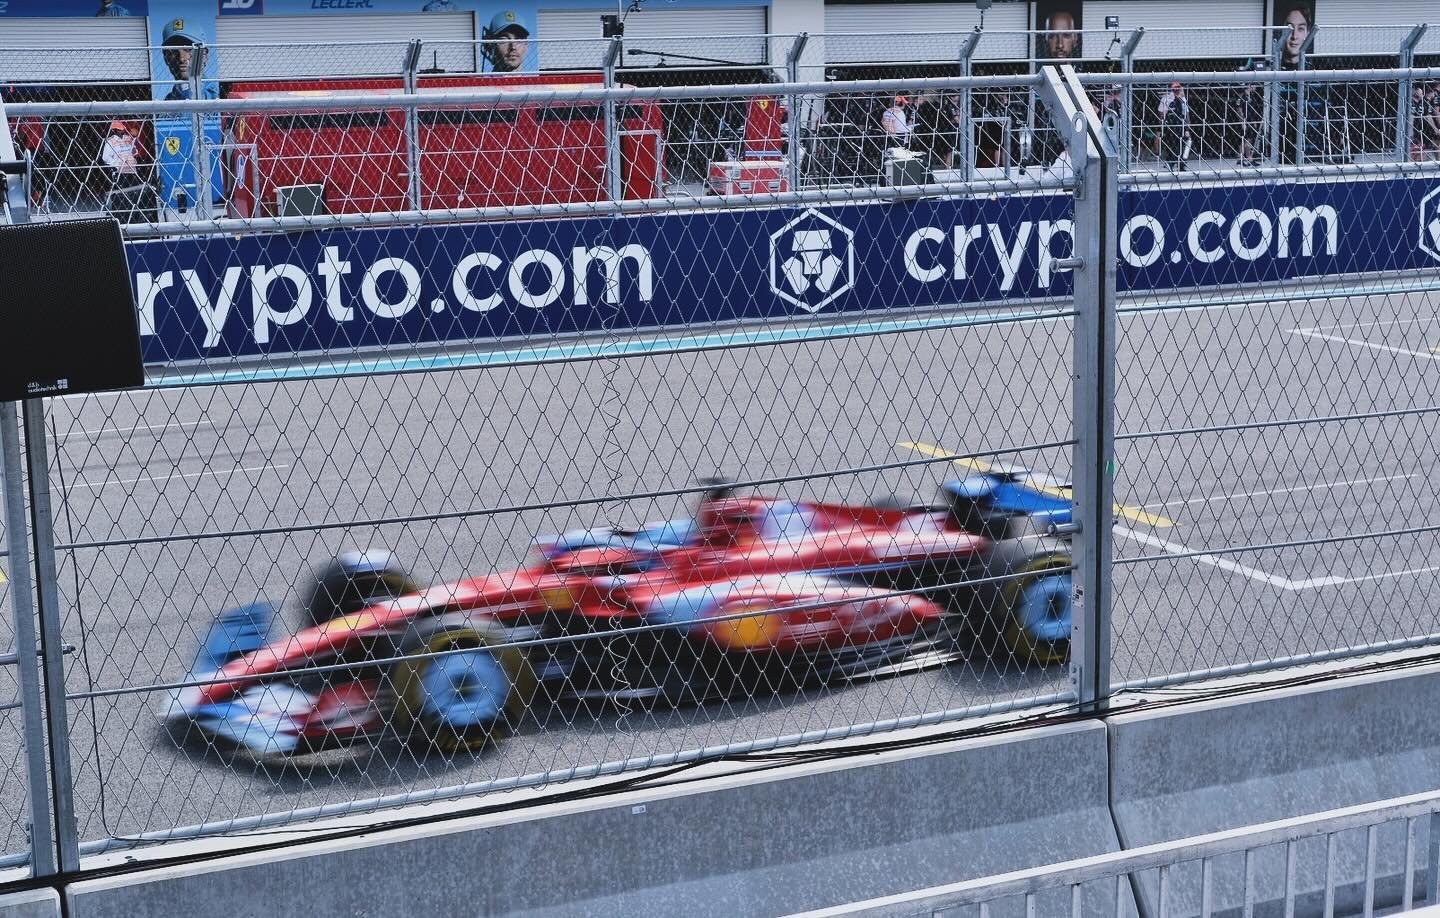 Did anyone see that incredible F1 race this past weekend? We certainly did! Our founder, Davis Brackett, was right in the midst of the excitement. We&rsquo;re eagerly looking forward to the Emilia Romagna Grand Prix, which we&rsquo;ll be enjoying fro